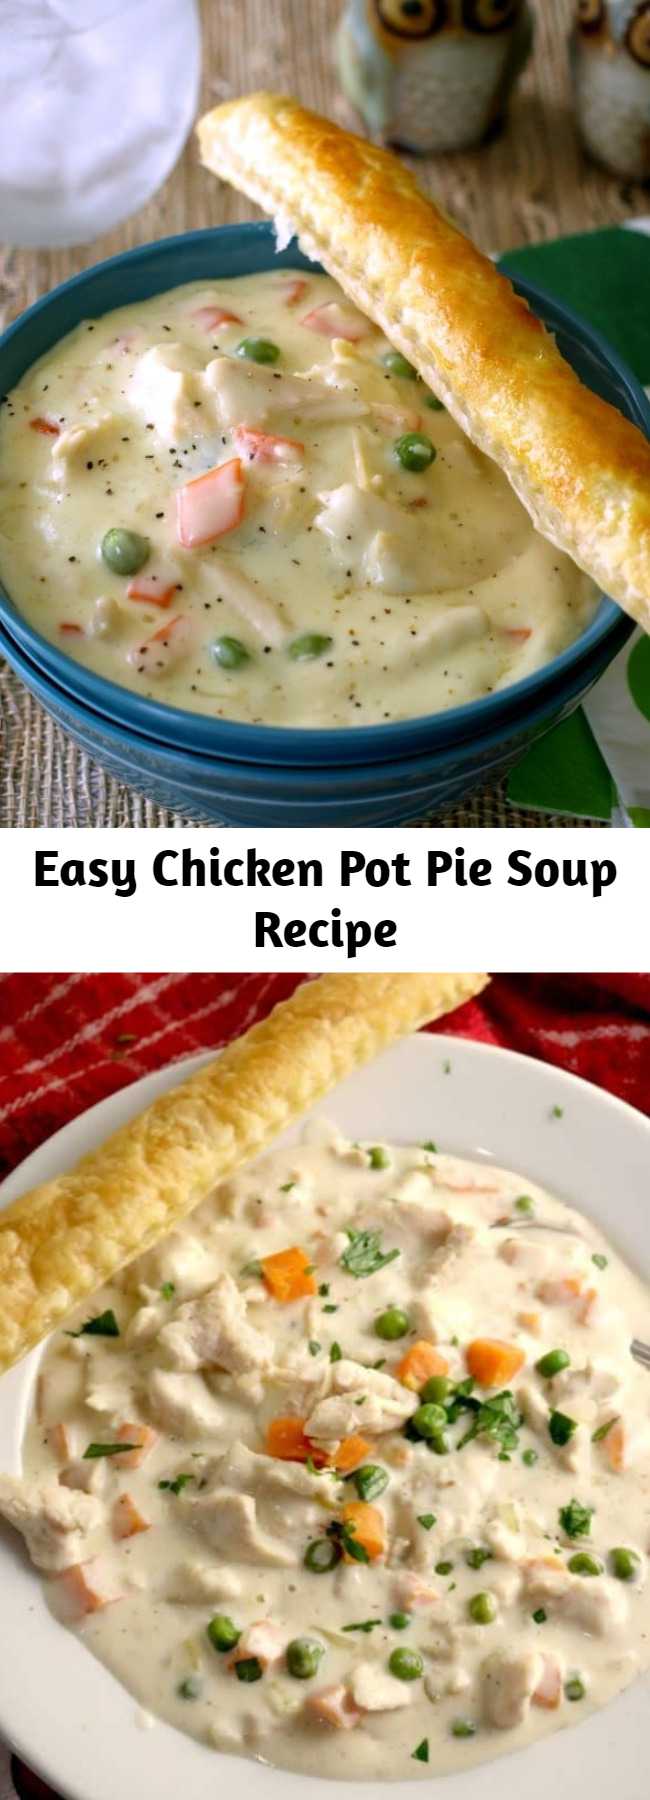 Easy Chicken Pot Pie Soup Recipe - This delicious Chicken Pot Pie Soup is a simple recipe made from scratch without the use of canned soup. It is hearty and rich filled with soul-warming comfort in a bowl.